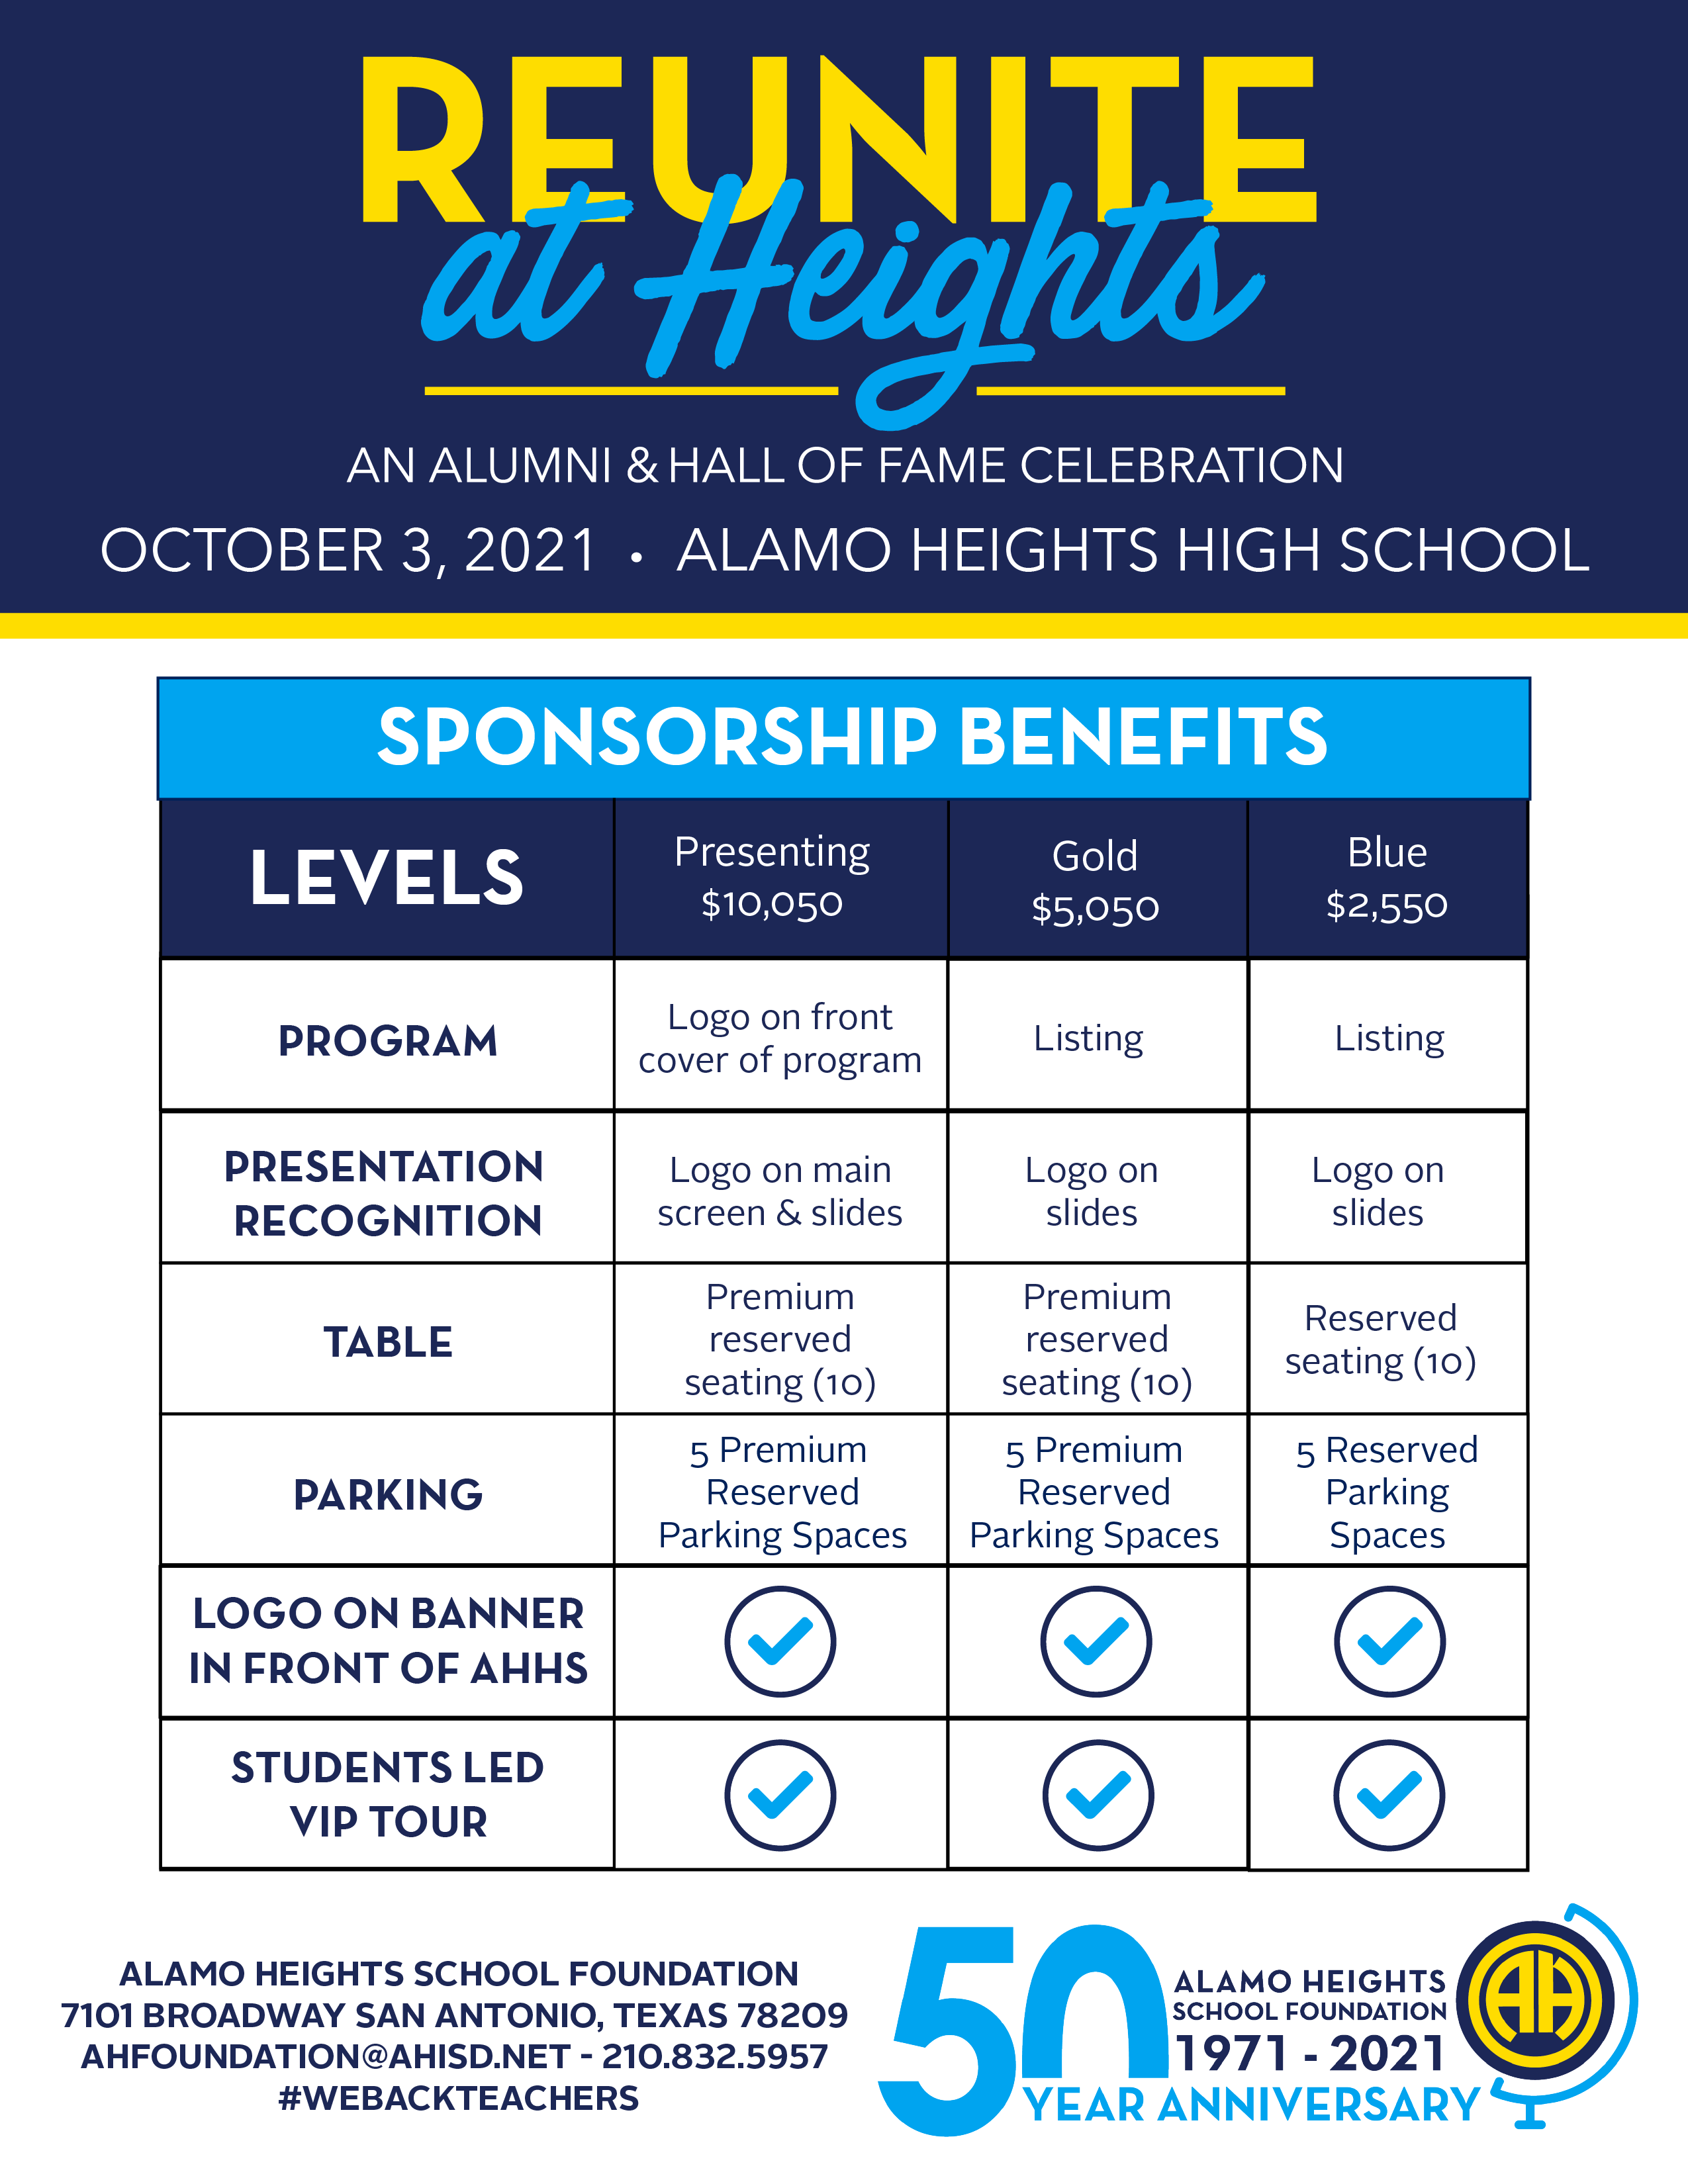 Clear Bag Policy for AHHS Athletic Facilities - Alamo Heights